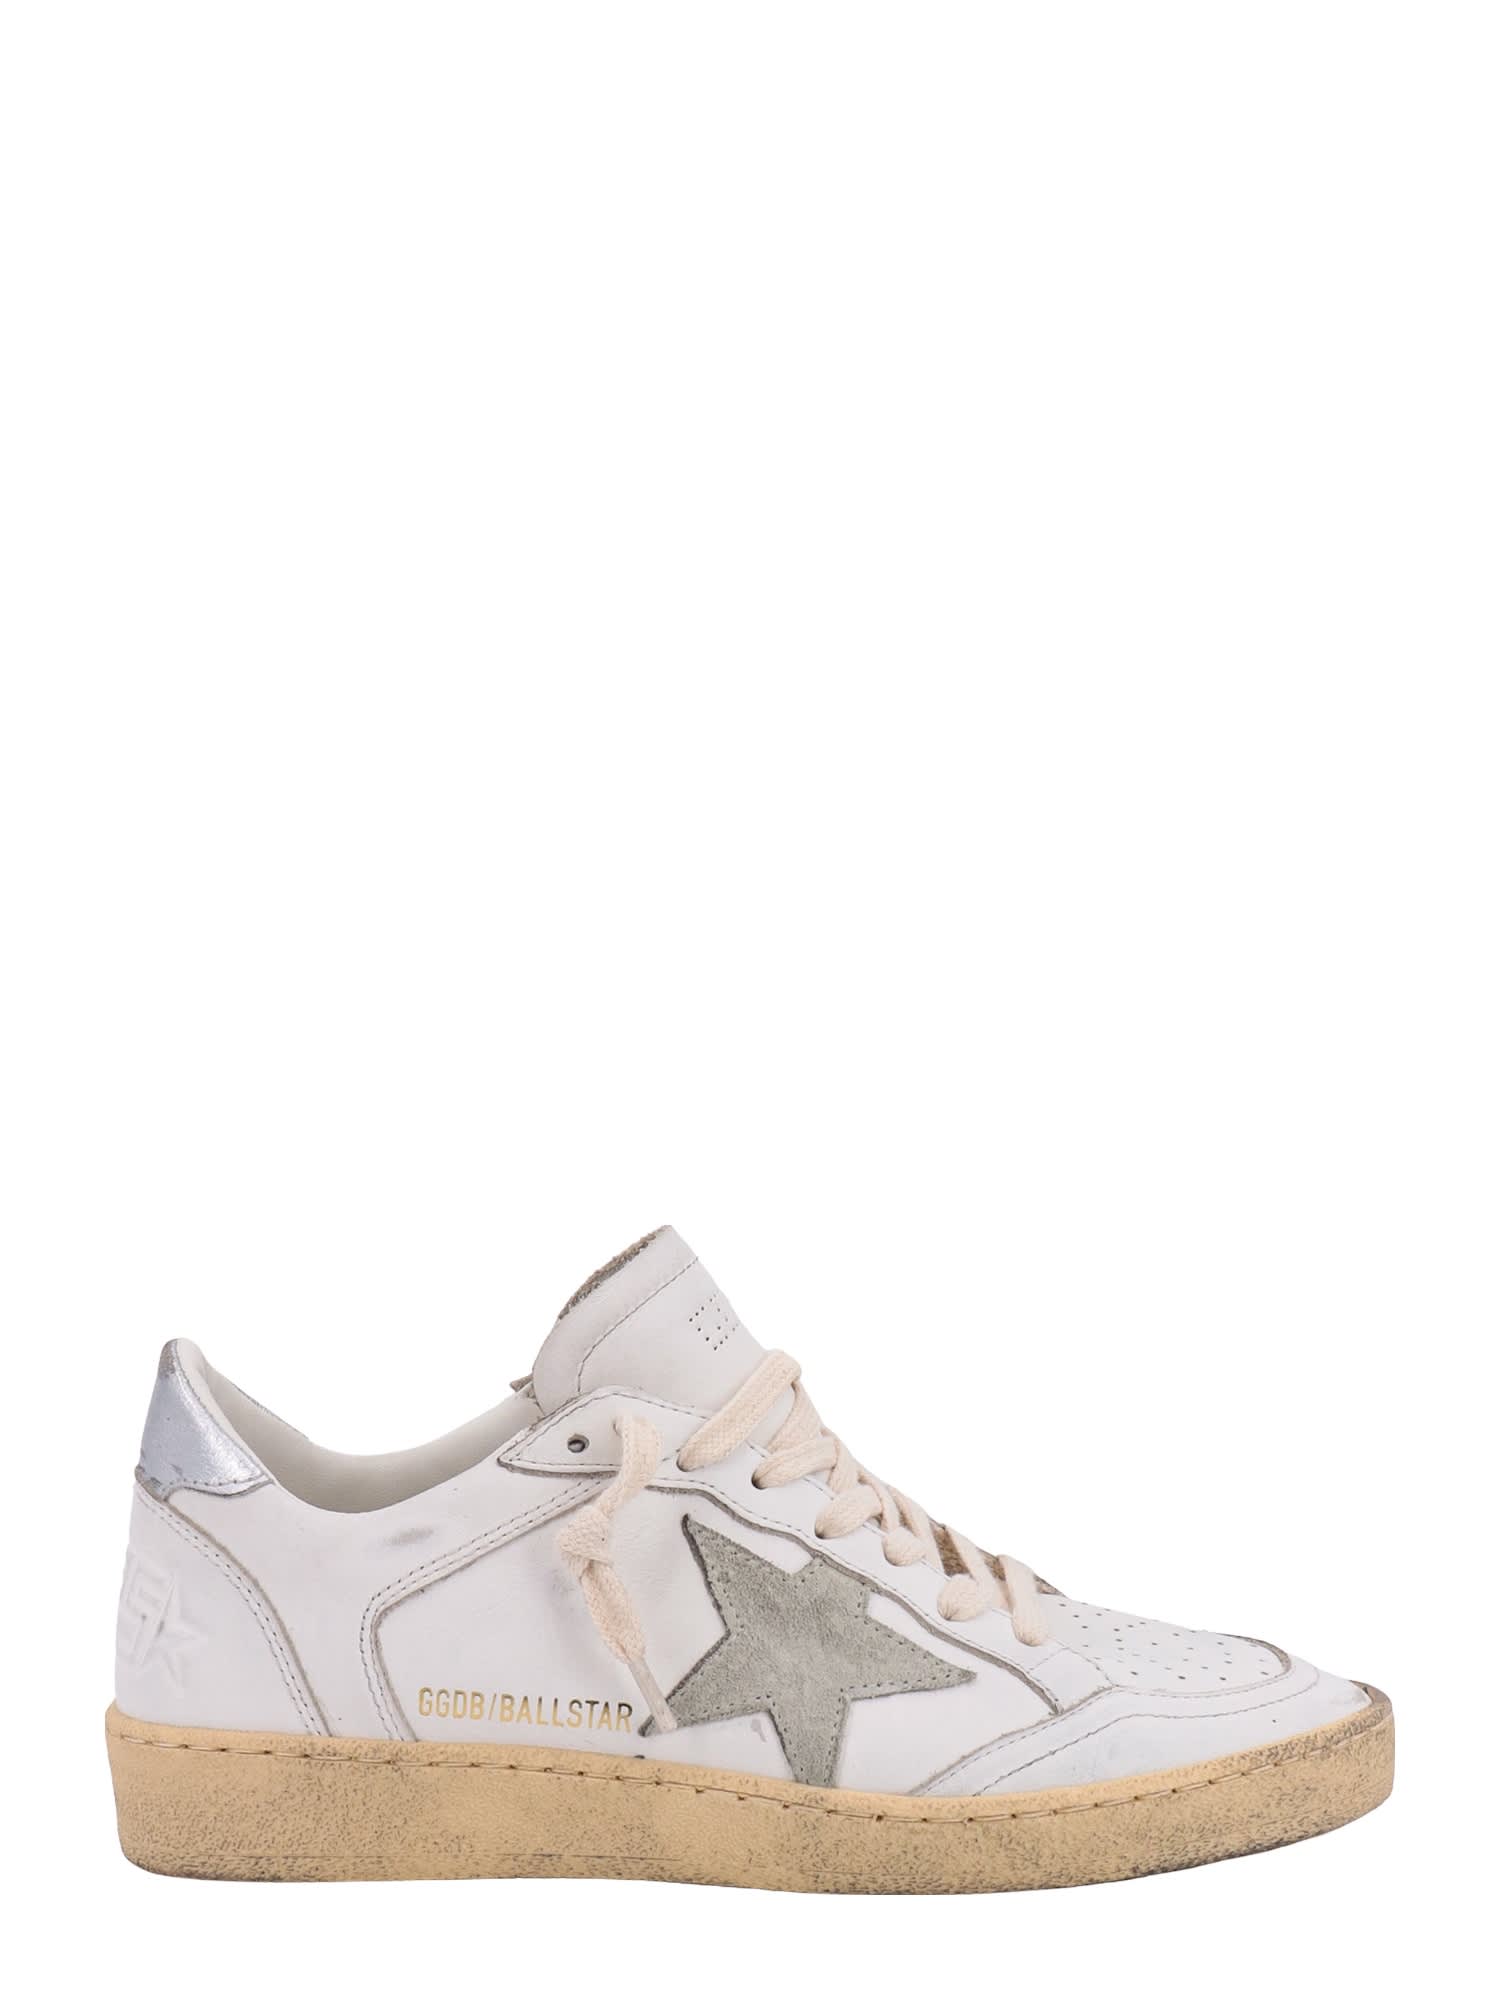 Golden Goose Ball Star Double Quarter Leather Sneakers